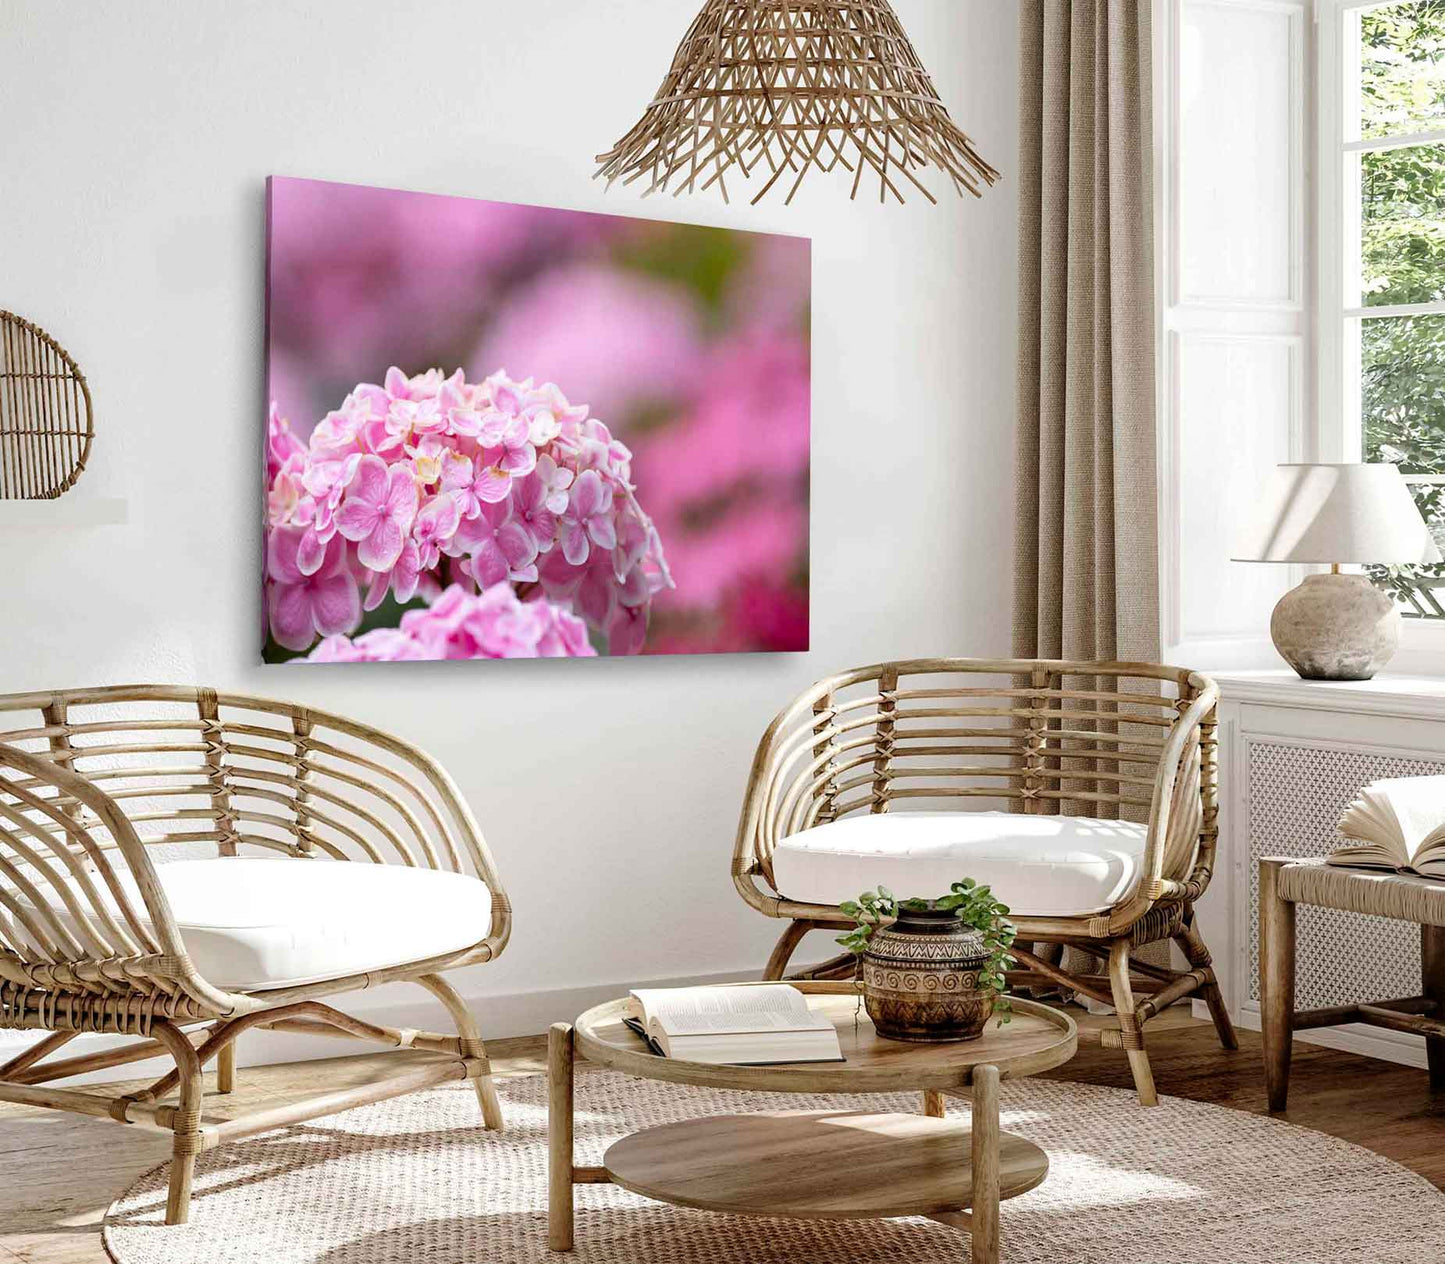 Bella Home Pink Hydrangea Flowers Photograph Print Canvas Ready to hang